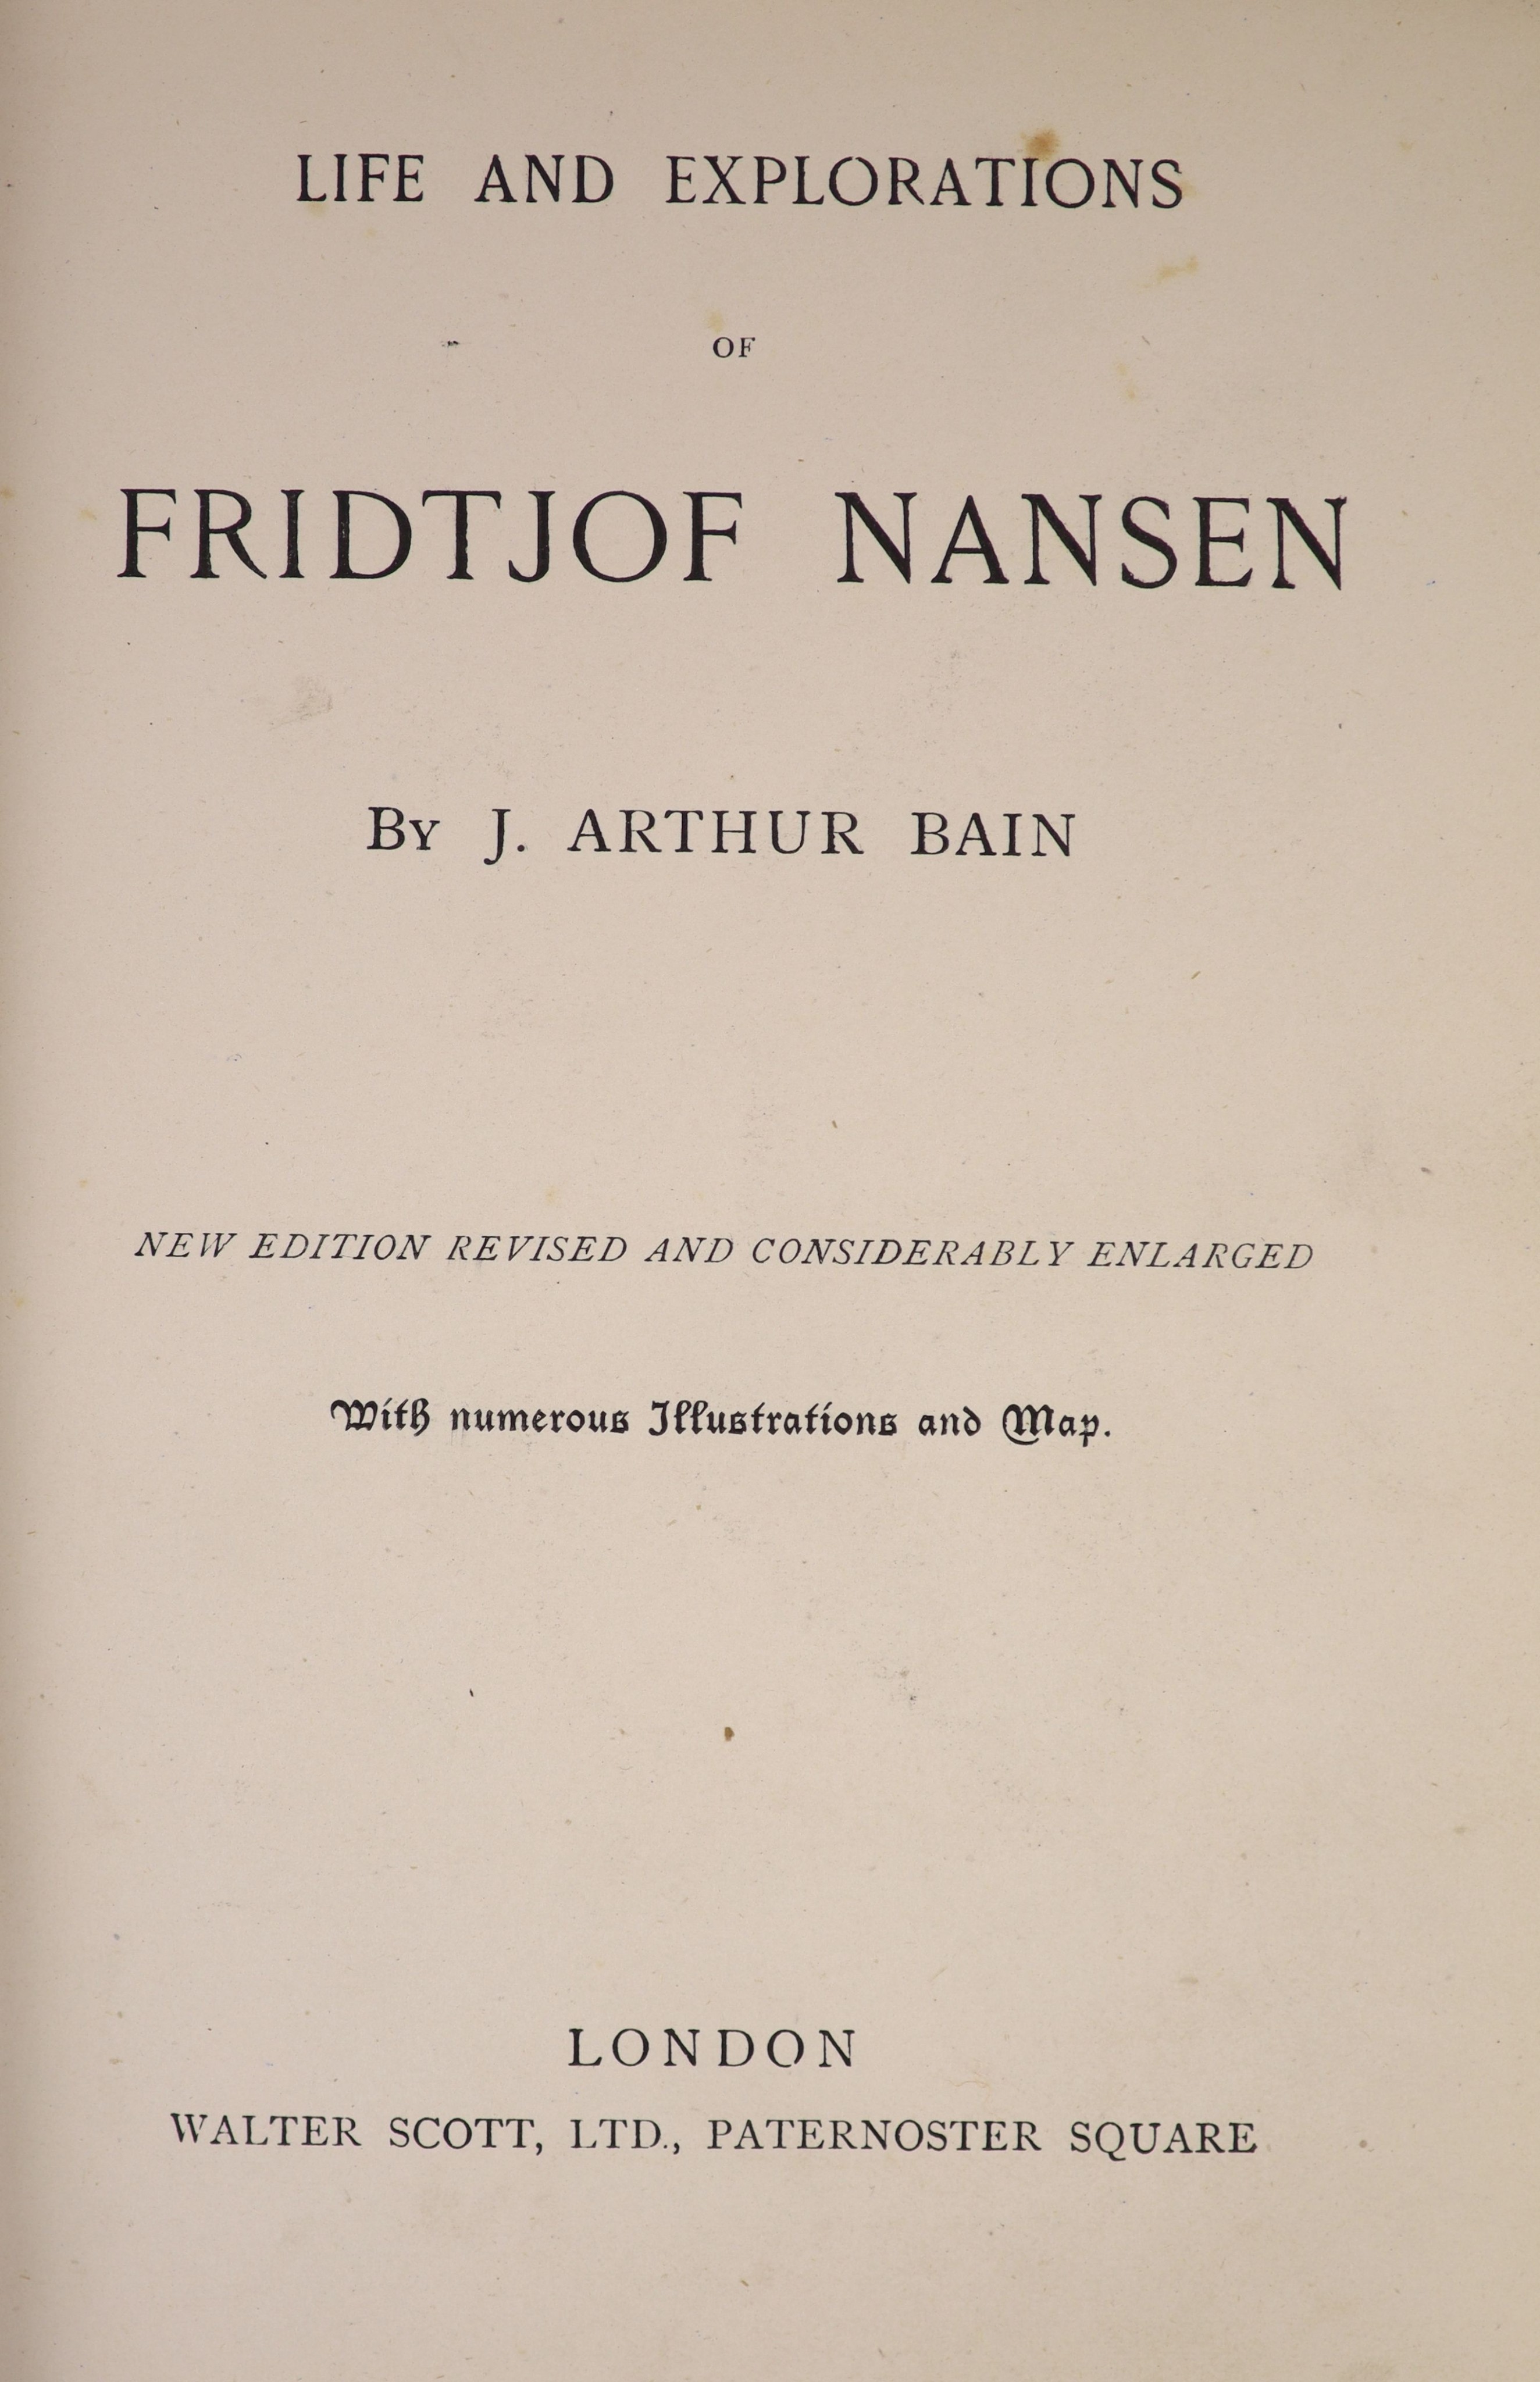 Bain, J. Arthur - Life and Explorations of Fridtjof Nansen. New edition revised and considerably enlarged. Complete with 15 engraved plates and numerous text illustrations, including 1 map. Embossed cloth with gilt portr